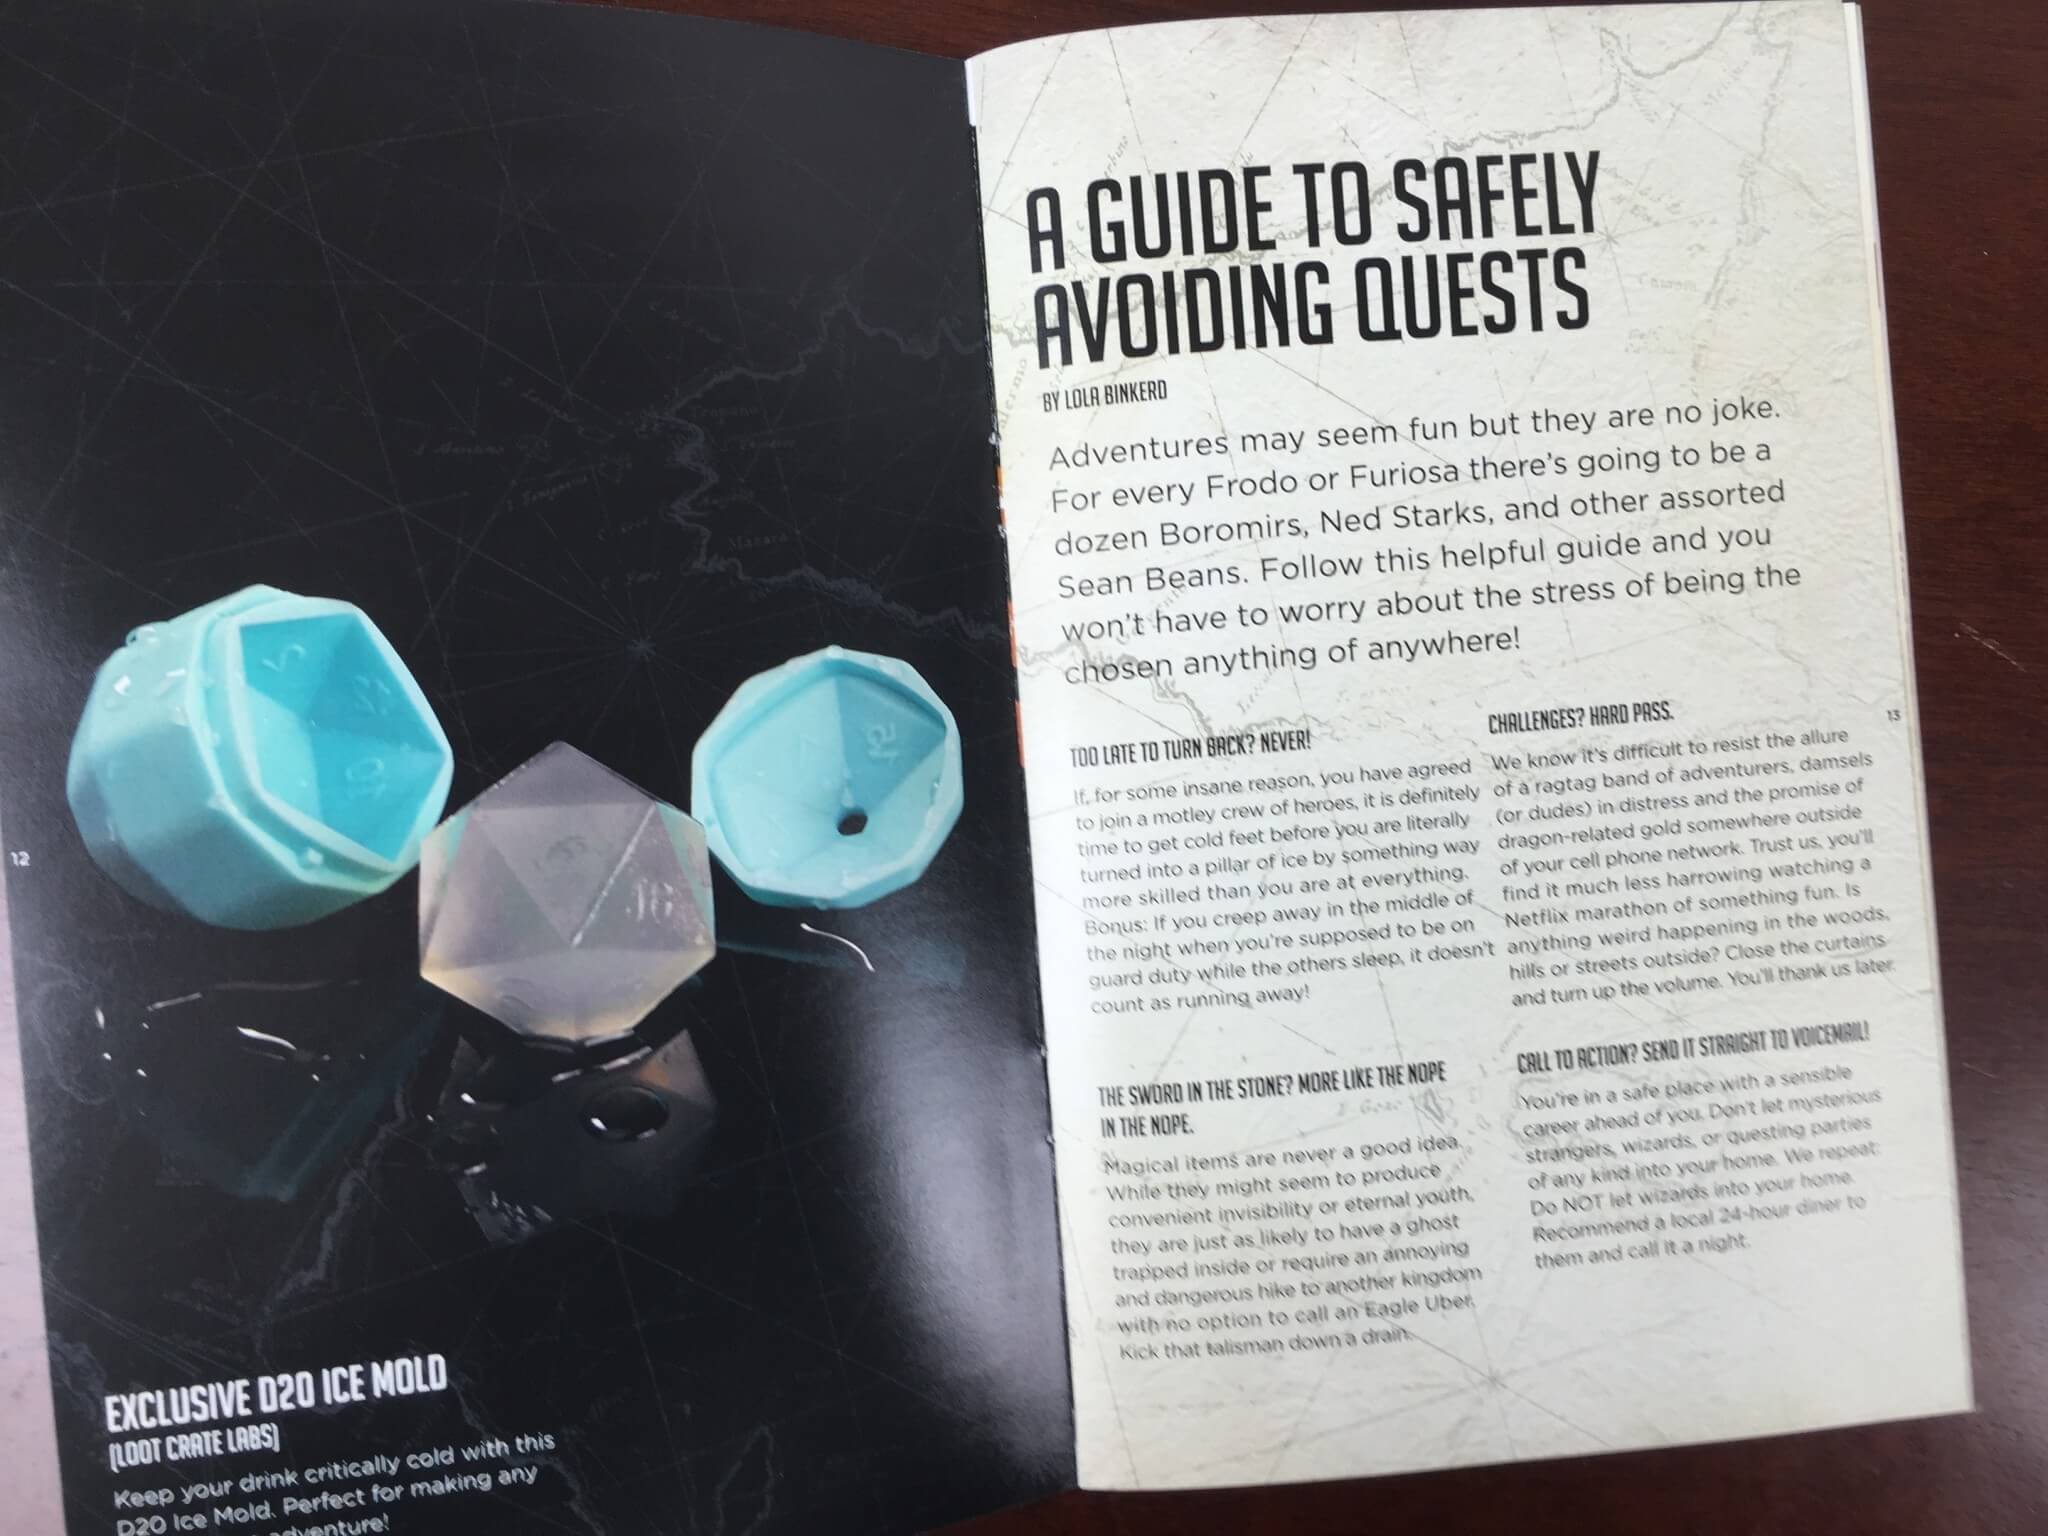 Loot Crate - Use code SAVE10 to save 10% on Loot Crate: loot.cr/catchloot  We weren't the only ones who took our d20 Ice Mold to a critical level!  We've seen some amazing